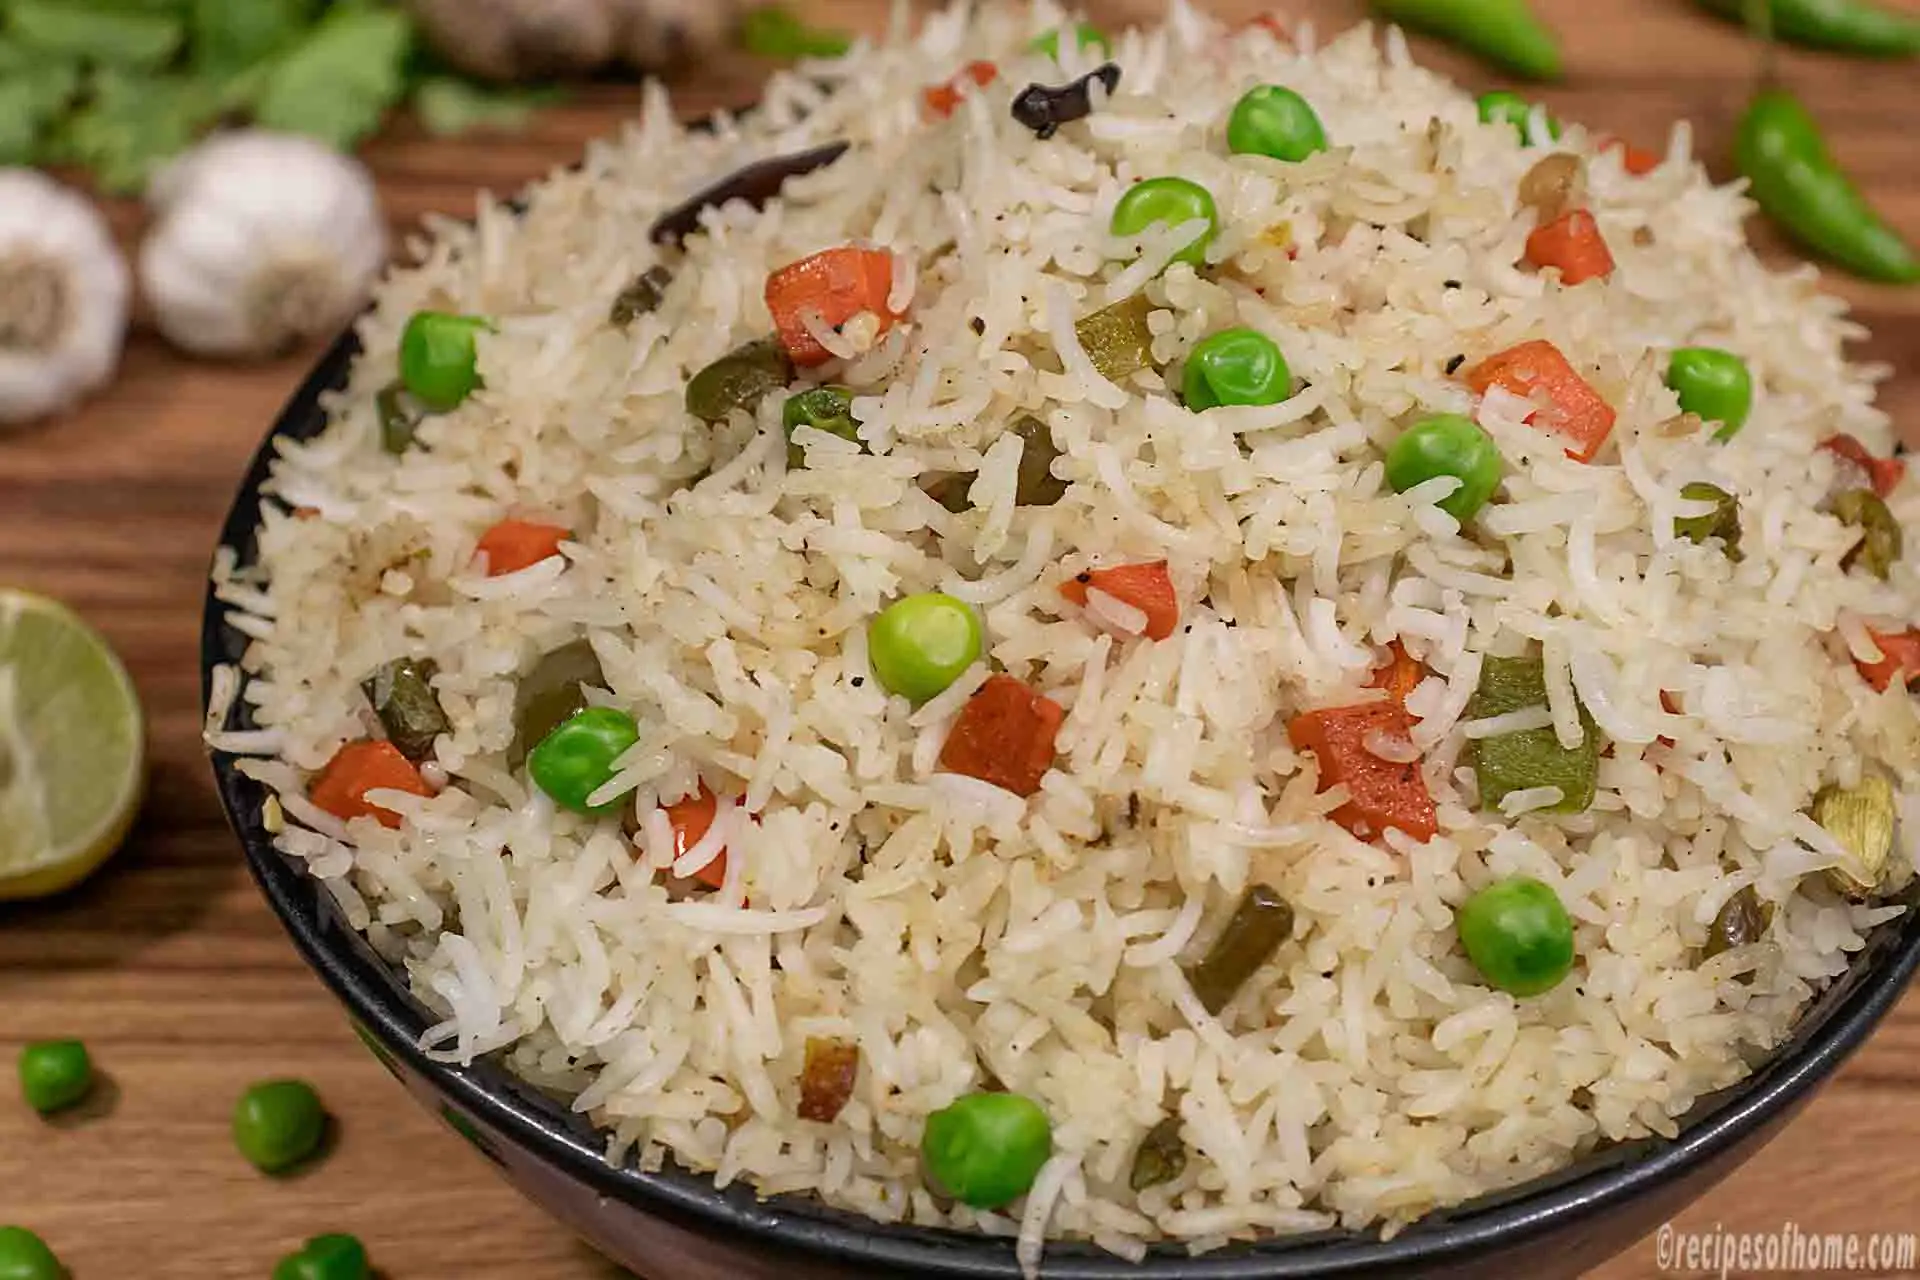 Veg Fried Rice Recipe How To Make Vegetable Fried Rice Recipe,Baked Ziti With Ricotta No Meat